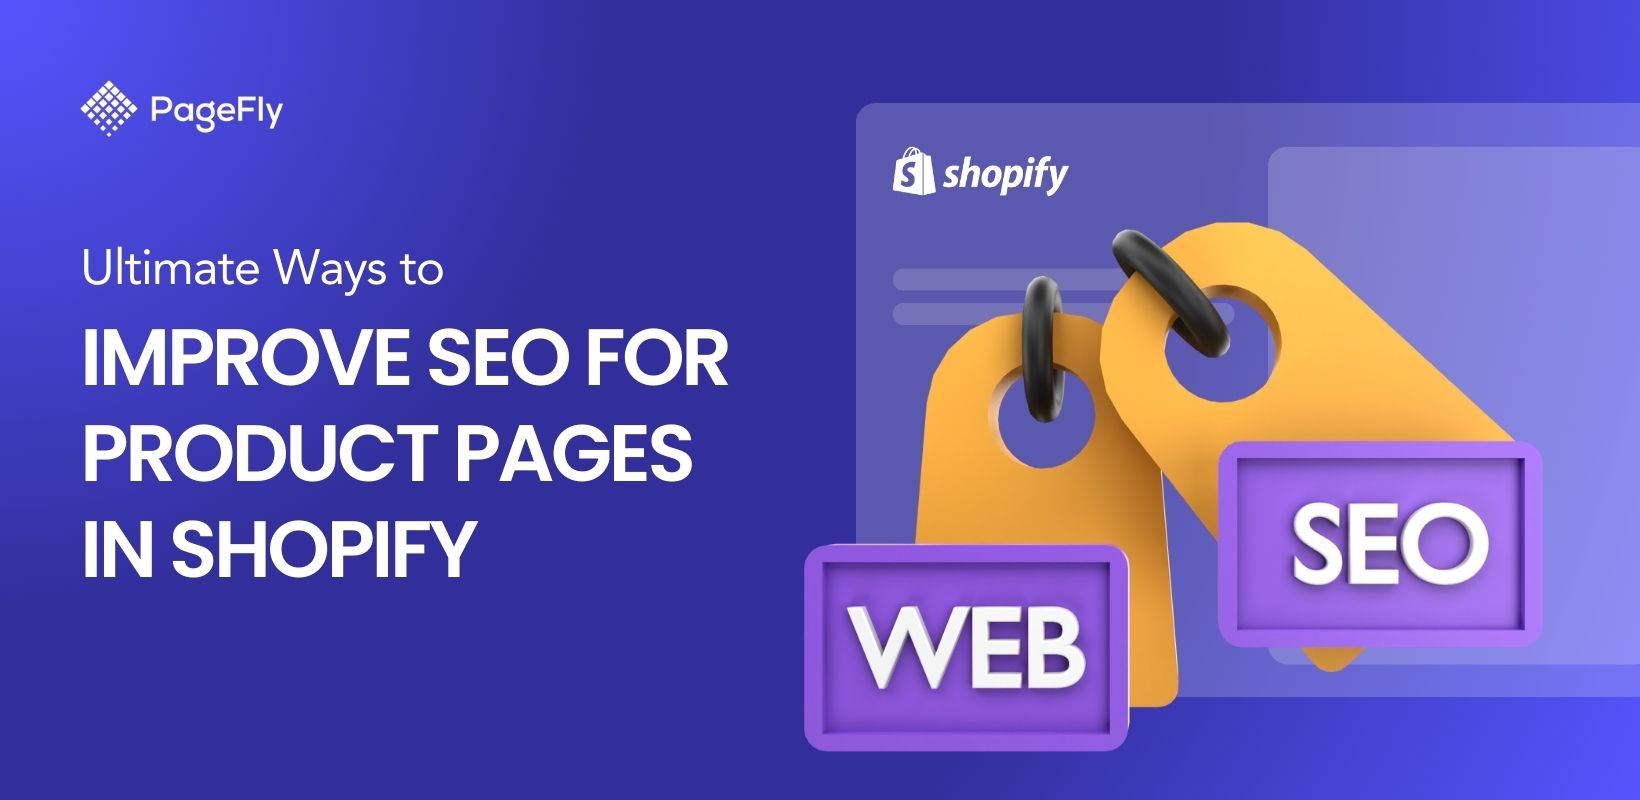 7 Ways to Improve SEO for Product Pages in Shopify